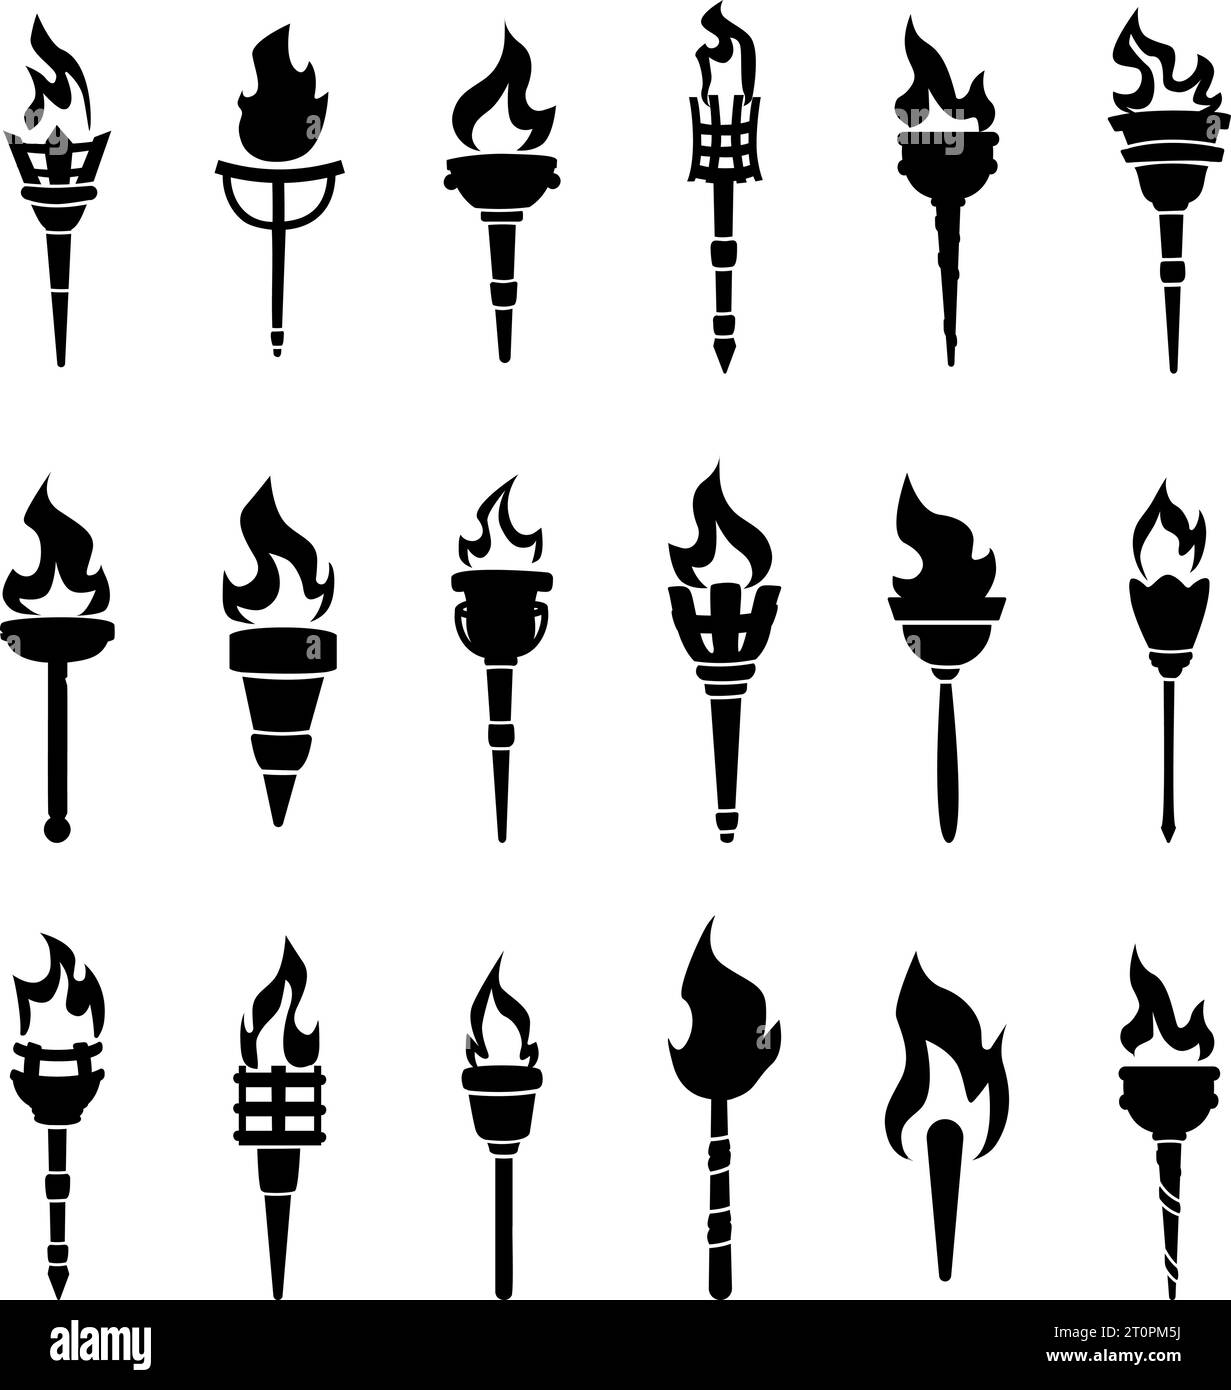 Black torch silhouettes. Isolated torches with flames. Success and leadership symbols, victory in competition icons. Flambeau nowaday vector set Stock Vector